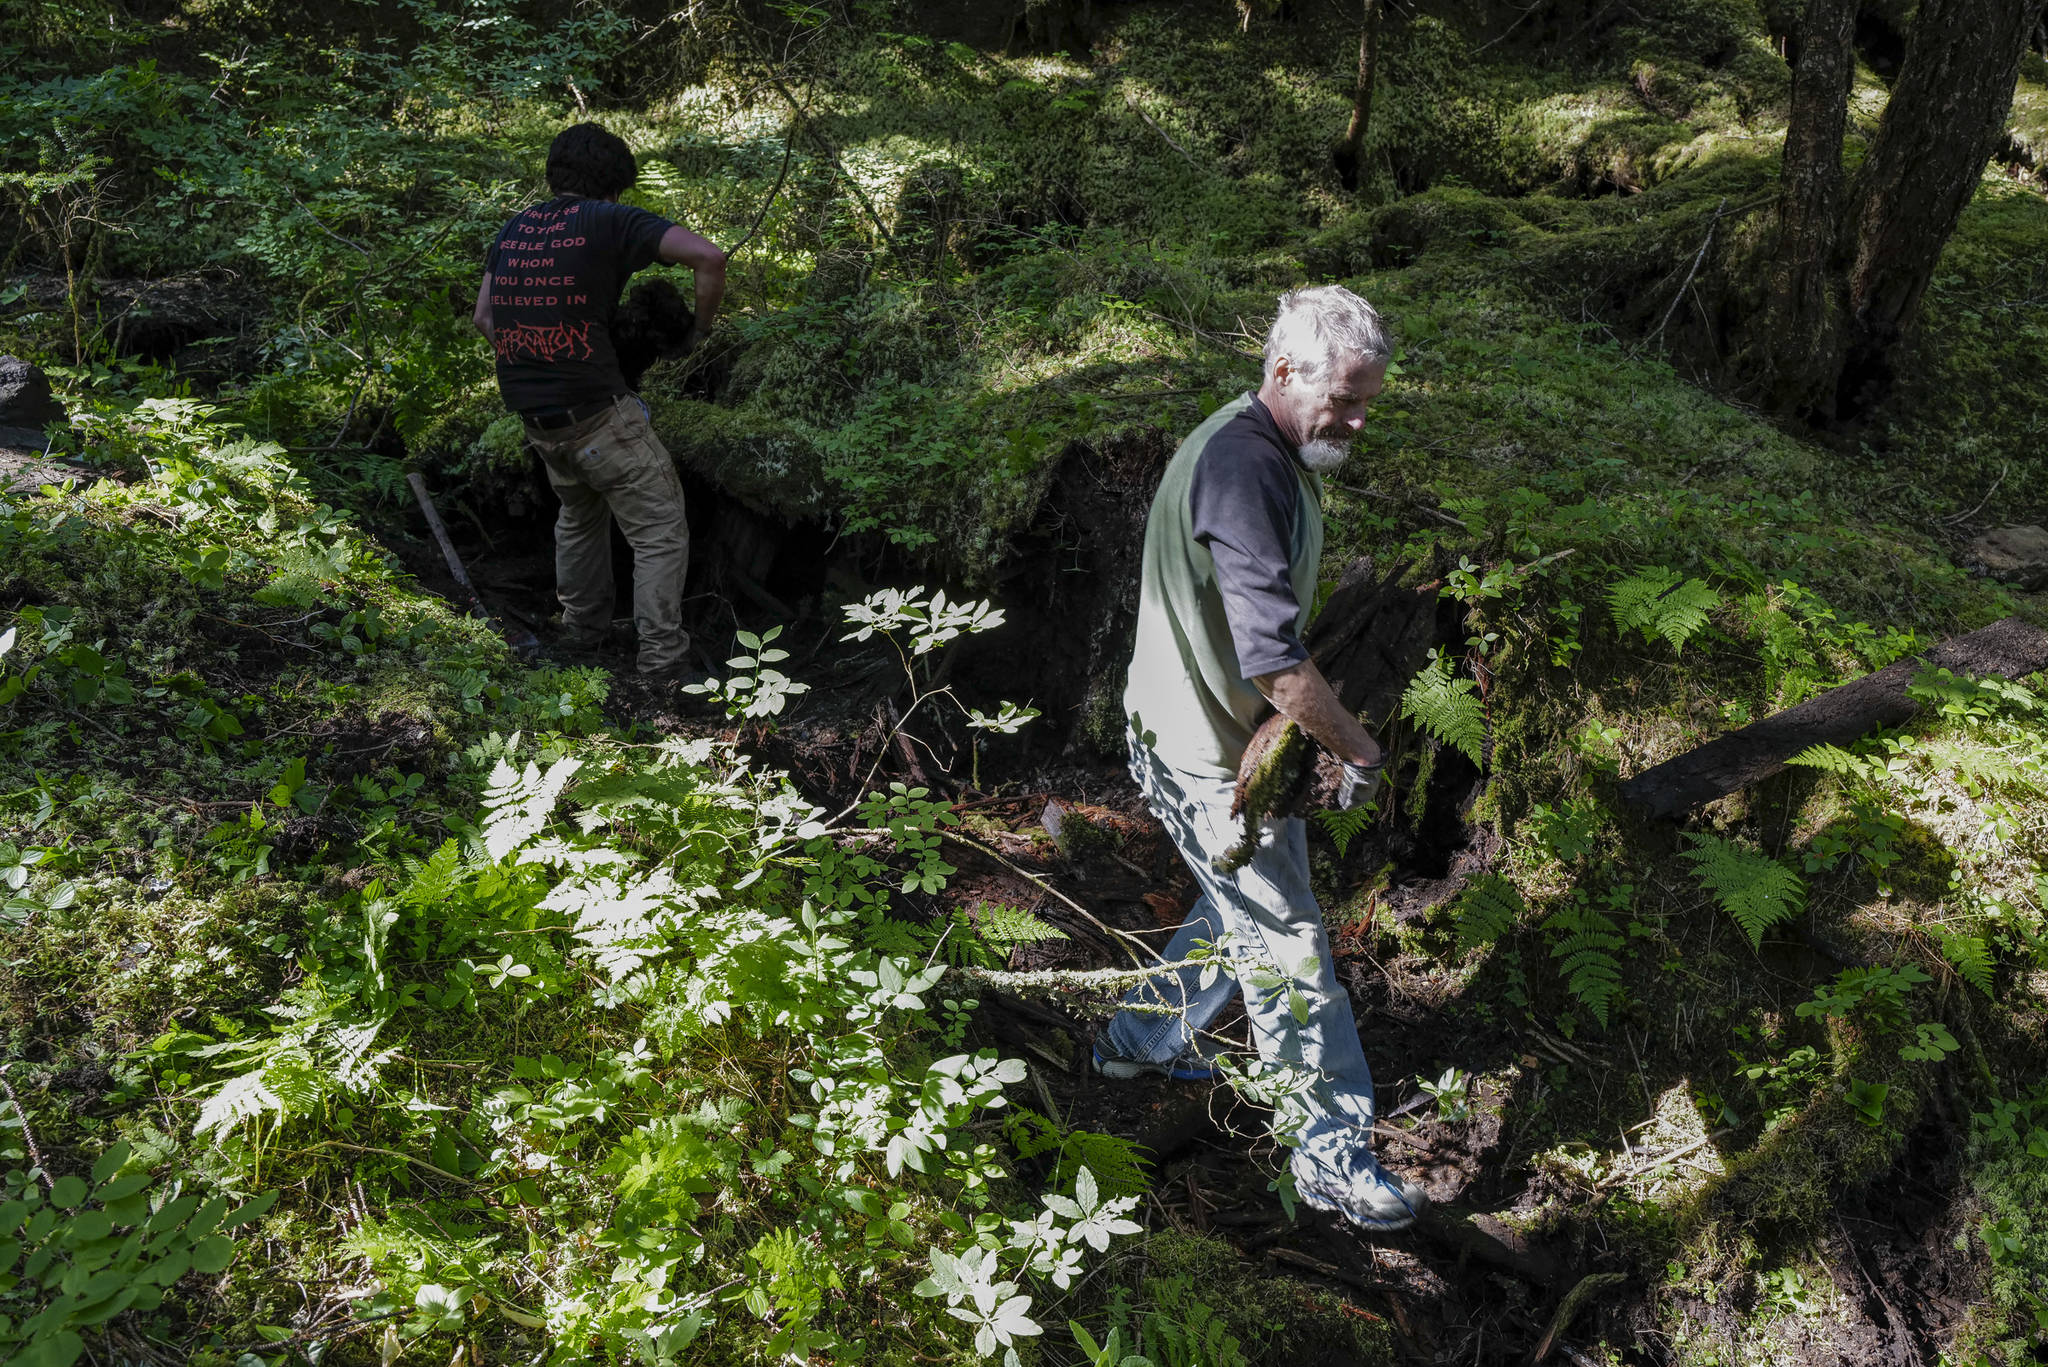 Diego Noboa, of Trail Mix, left, and volunteer Craig Good clear an area of debris for a drainage pipe on a new Treadwell Gorge reroute trail on the Treadwell Ditch Trail on Thursday, Aug. 8, 2019. (Michael Penn | Juneau Empire)